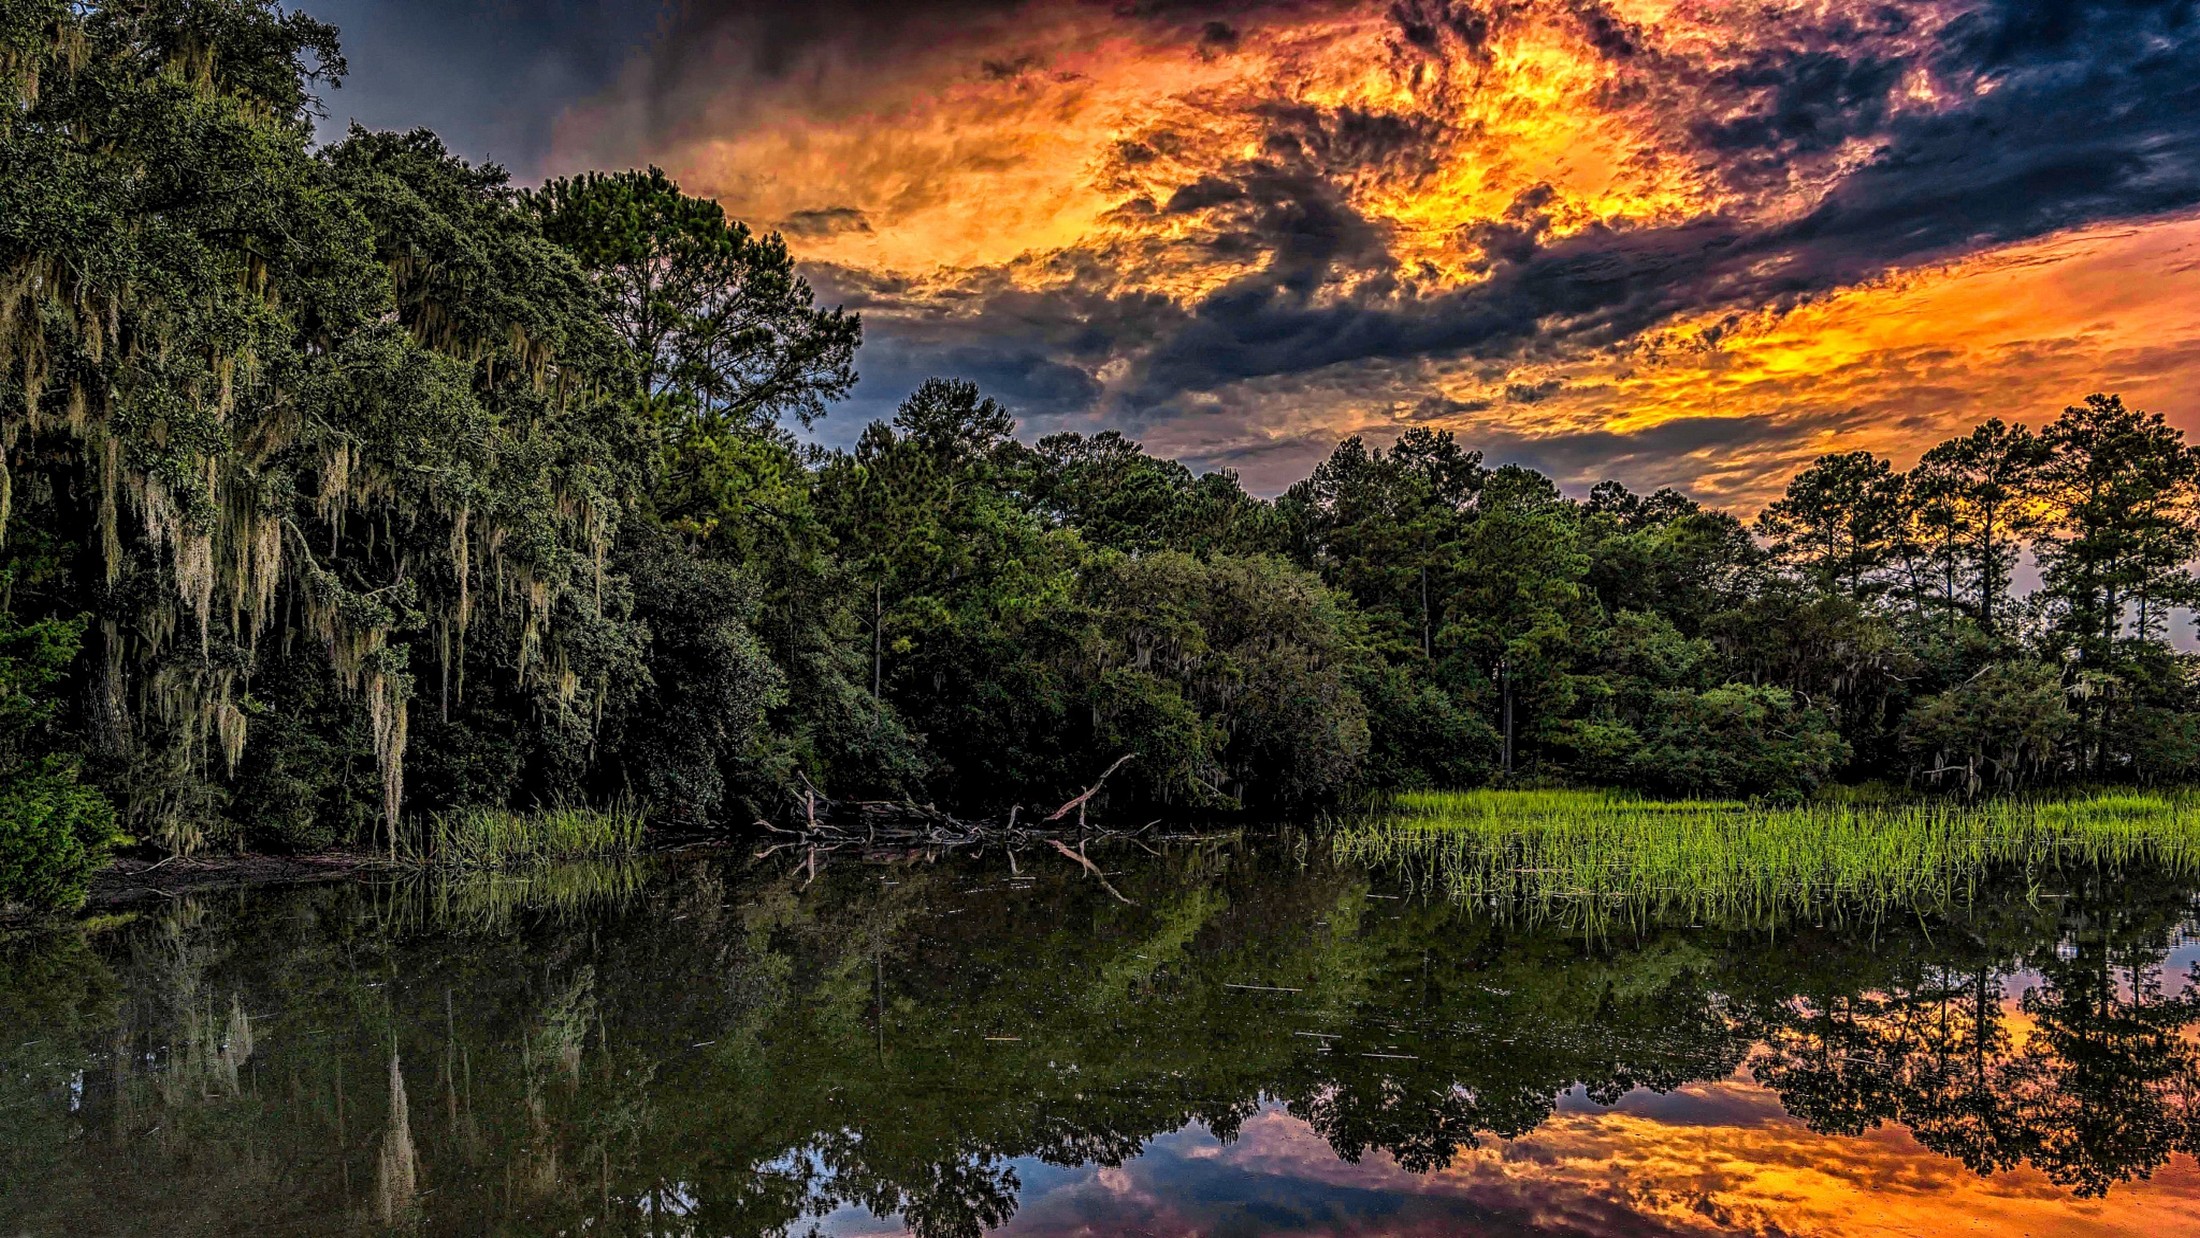 Nature Landscape Sunset HDR River Reflection Summer South Carolina Clouds Forest Sky Water Trees Fol 2200x1238